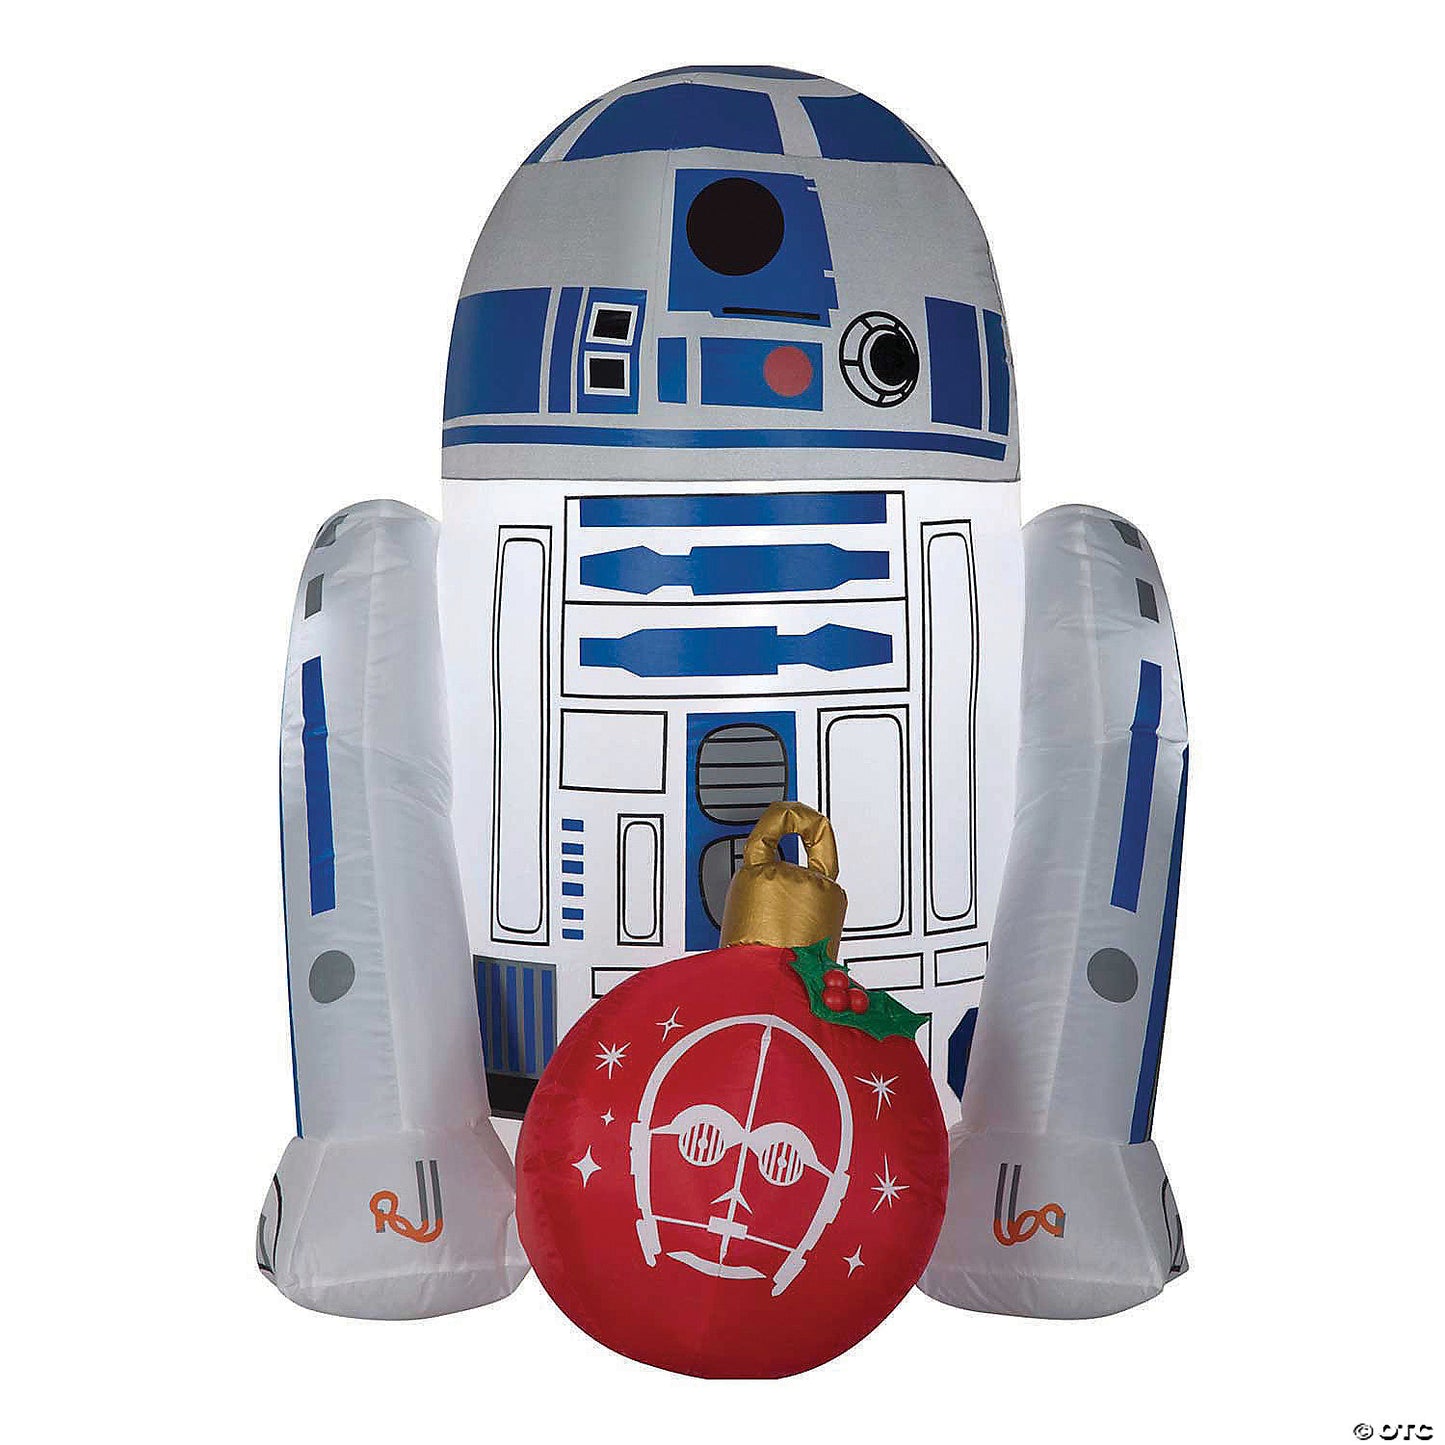 42" Blow Up Inflatable Star Wars R2D2 with Ornament Outdoor Yard Decoration